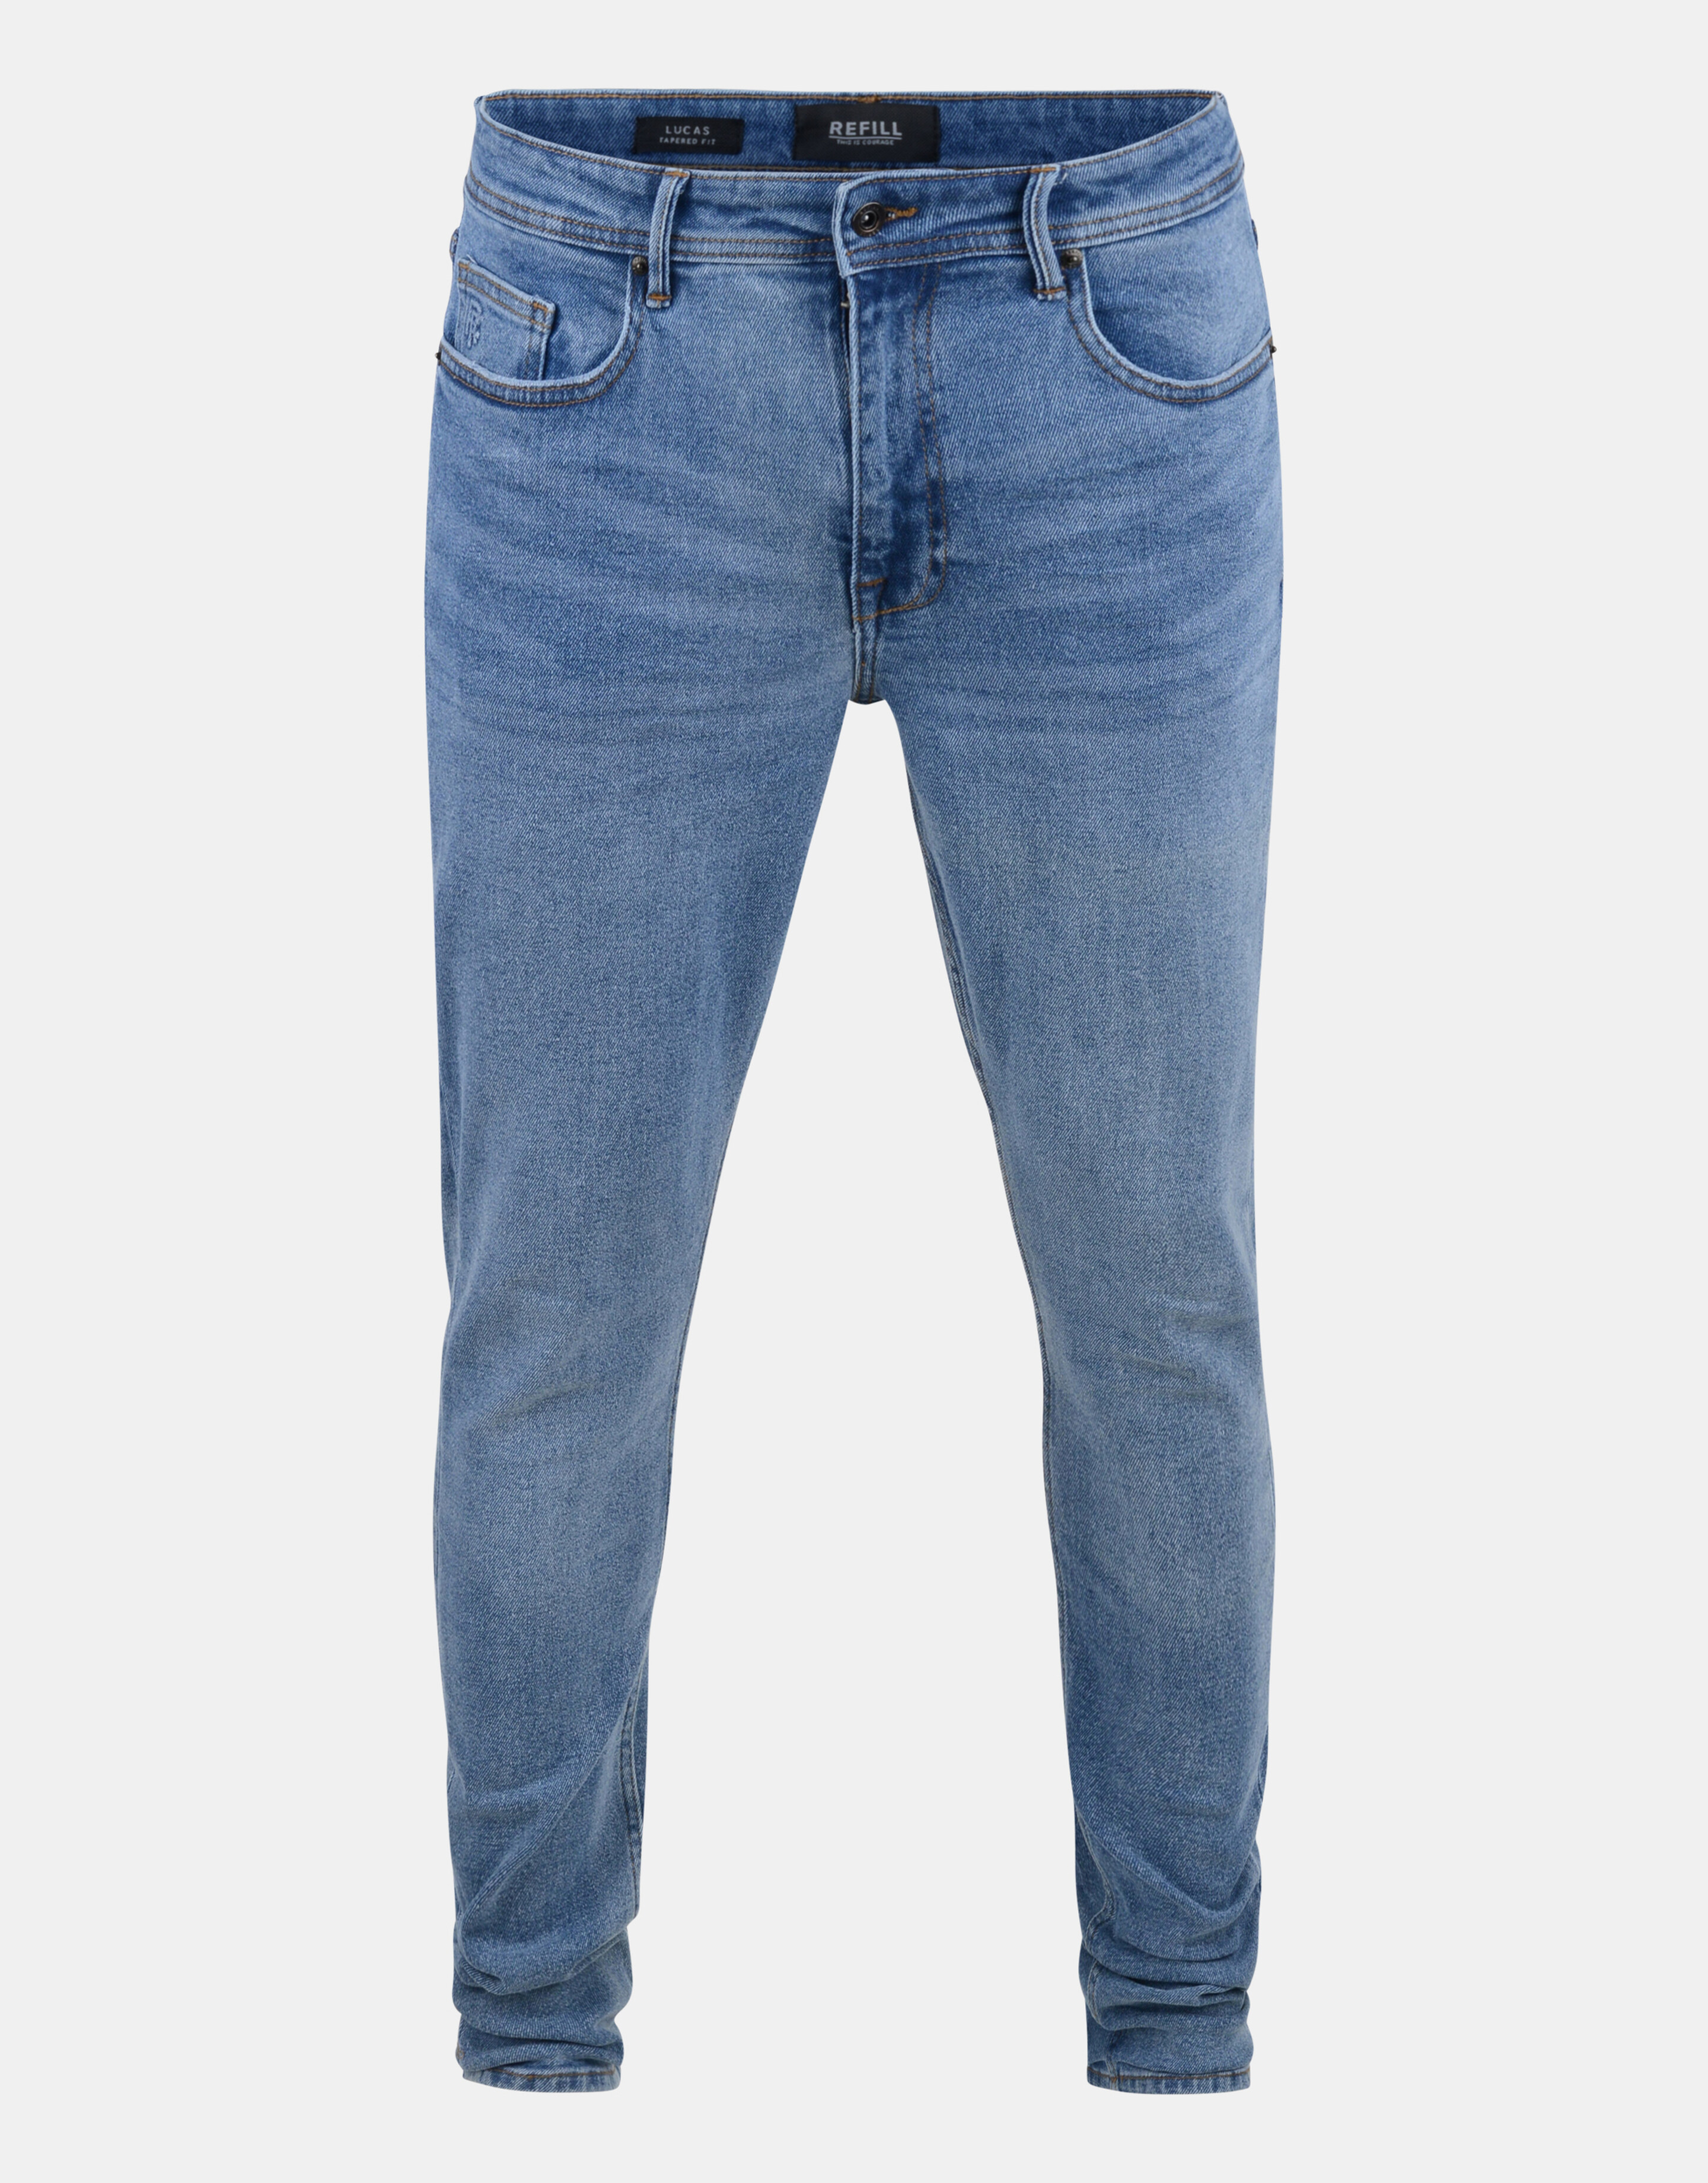 Lucas Slim Tapered Jeans L32 REFILL